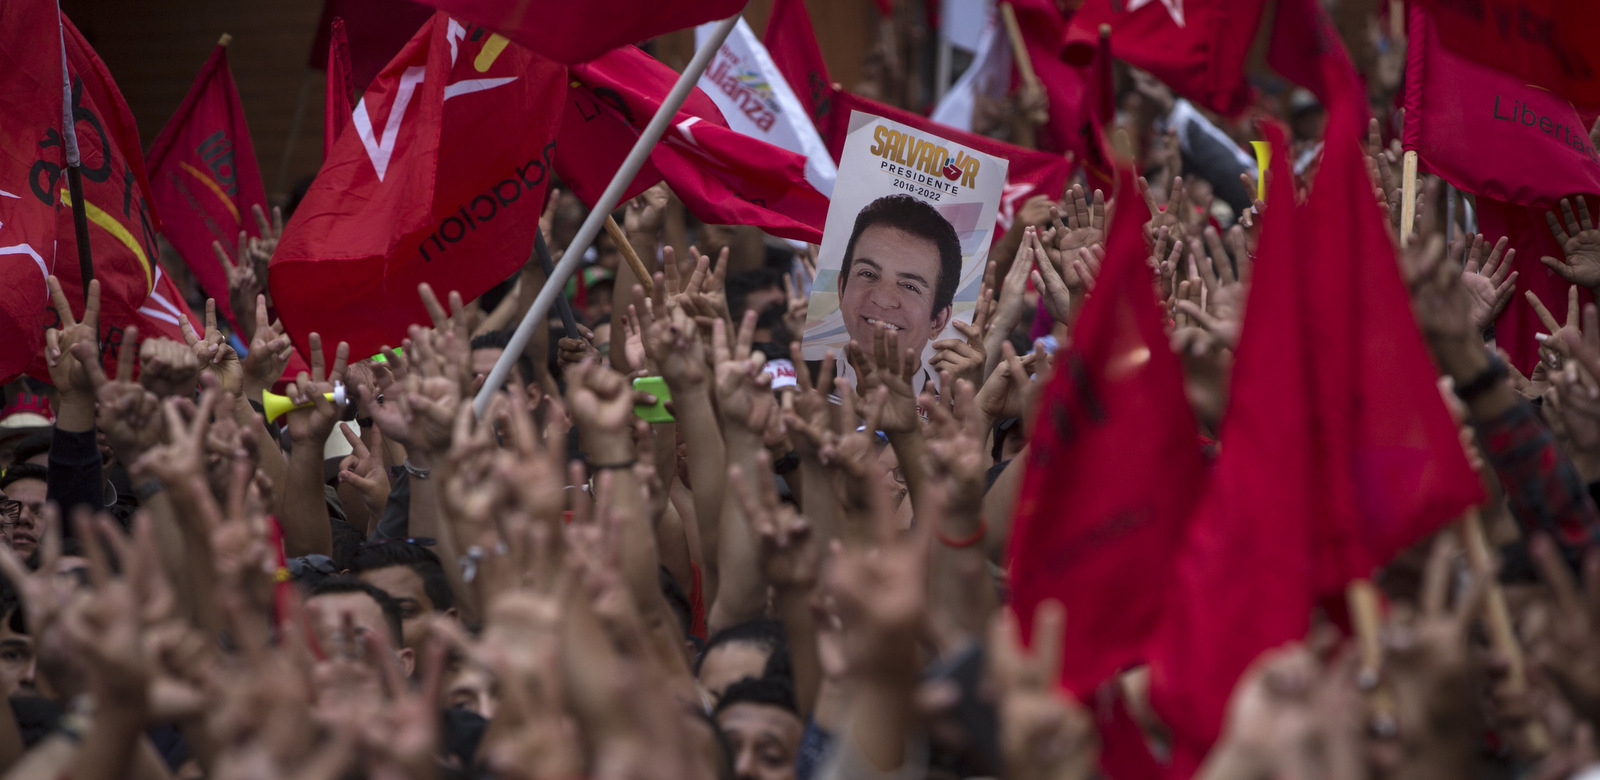 Supporters of opposition Alliance presidential candidate Salvador Nasralla chant slogans in front of the Supreme Electoral Tribunal in Tegucigalpa, Honduras, Nov. 27, 2017. Early results from Honduras' presidential election Monday showed leftist challenger Nasralla with a surprise lead over incumbent President Juan Orlando Hernandez, both of whom had claimed victory. (AP/Rodrigo Abd)